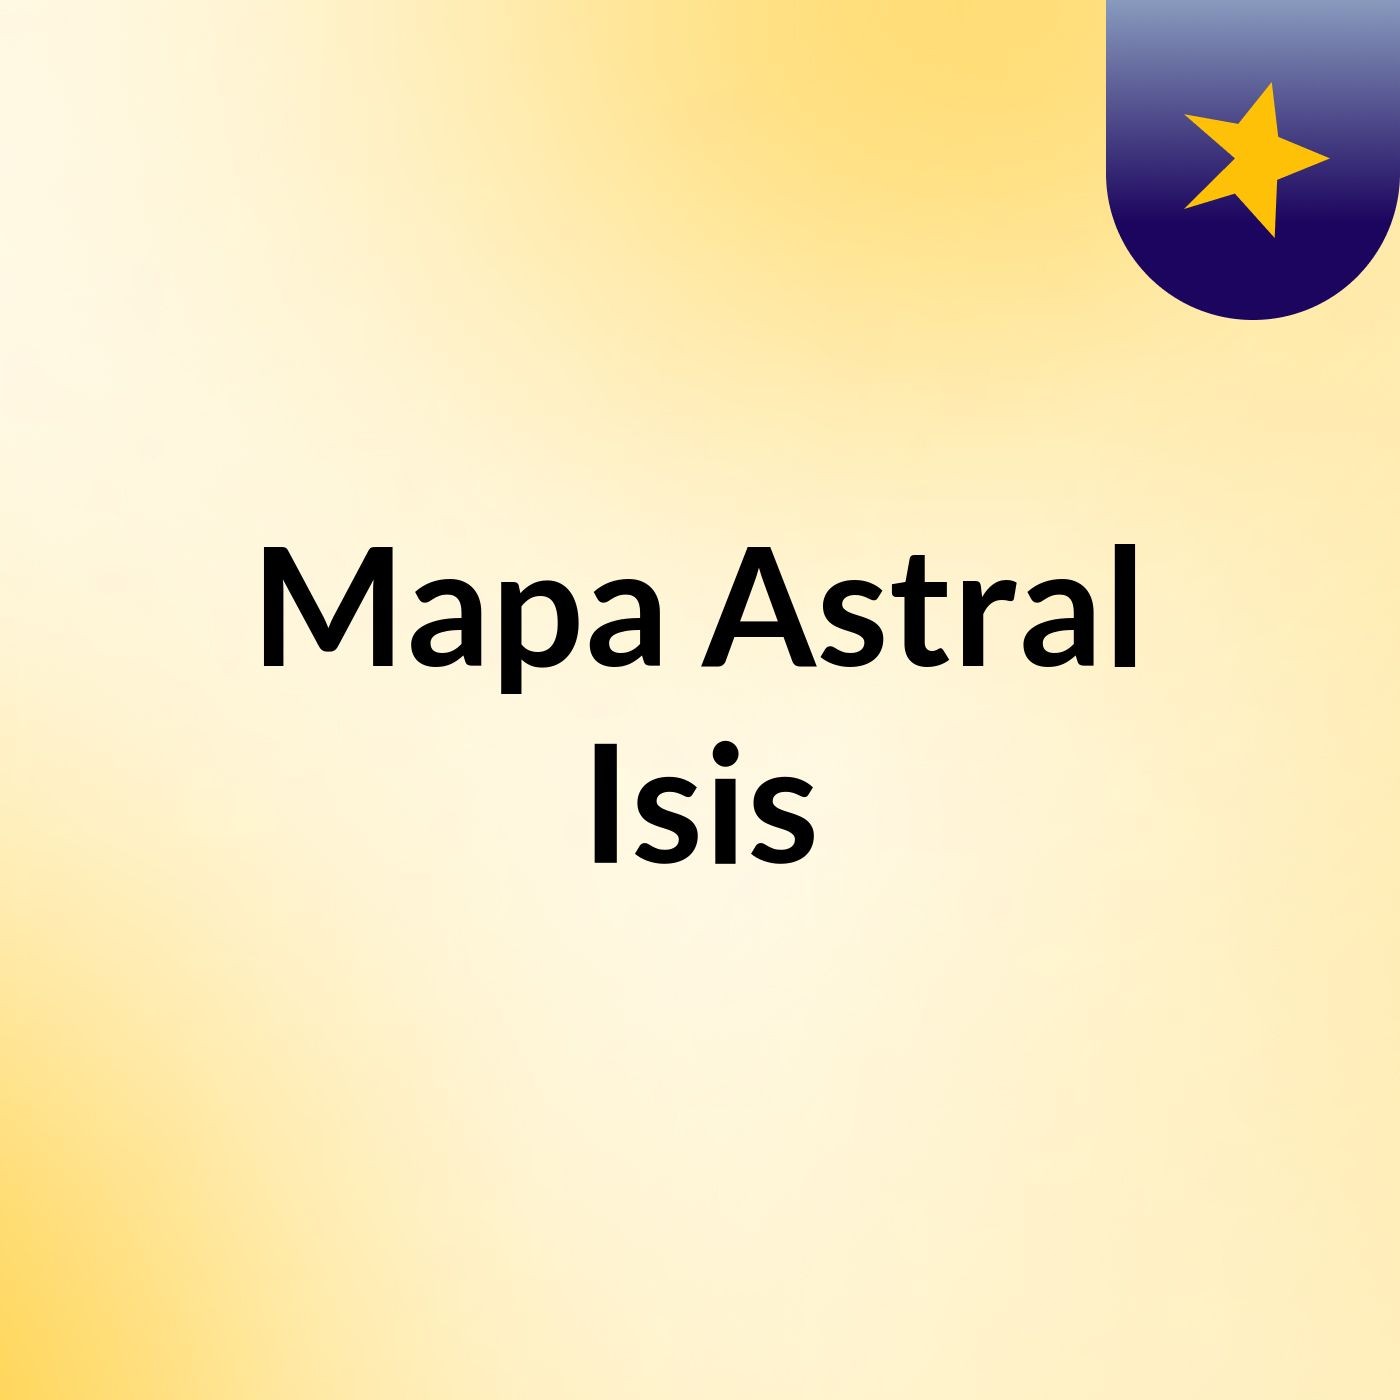 Mapa Astral Isis